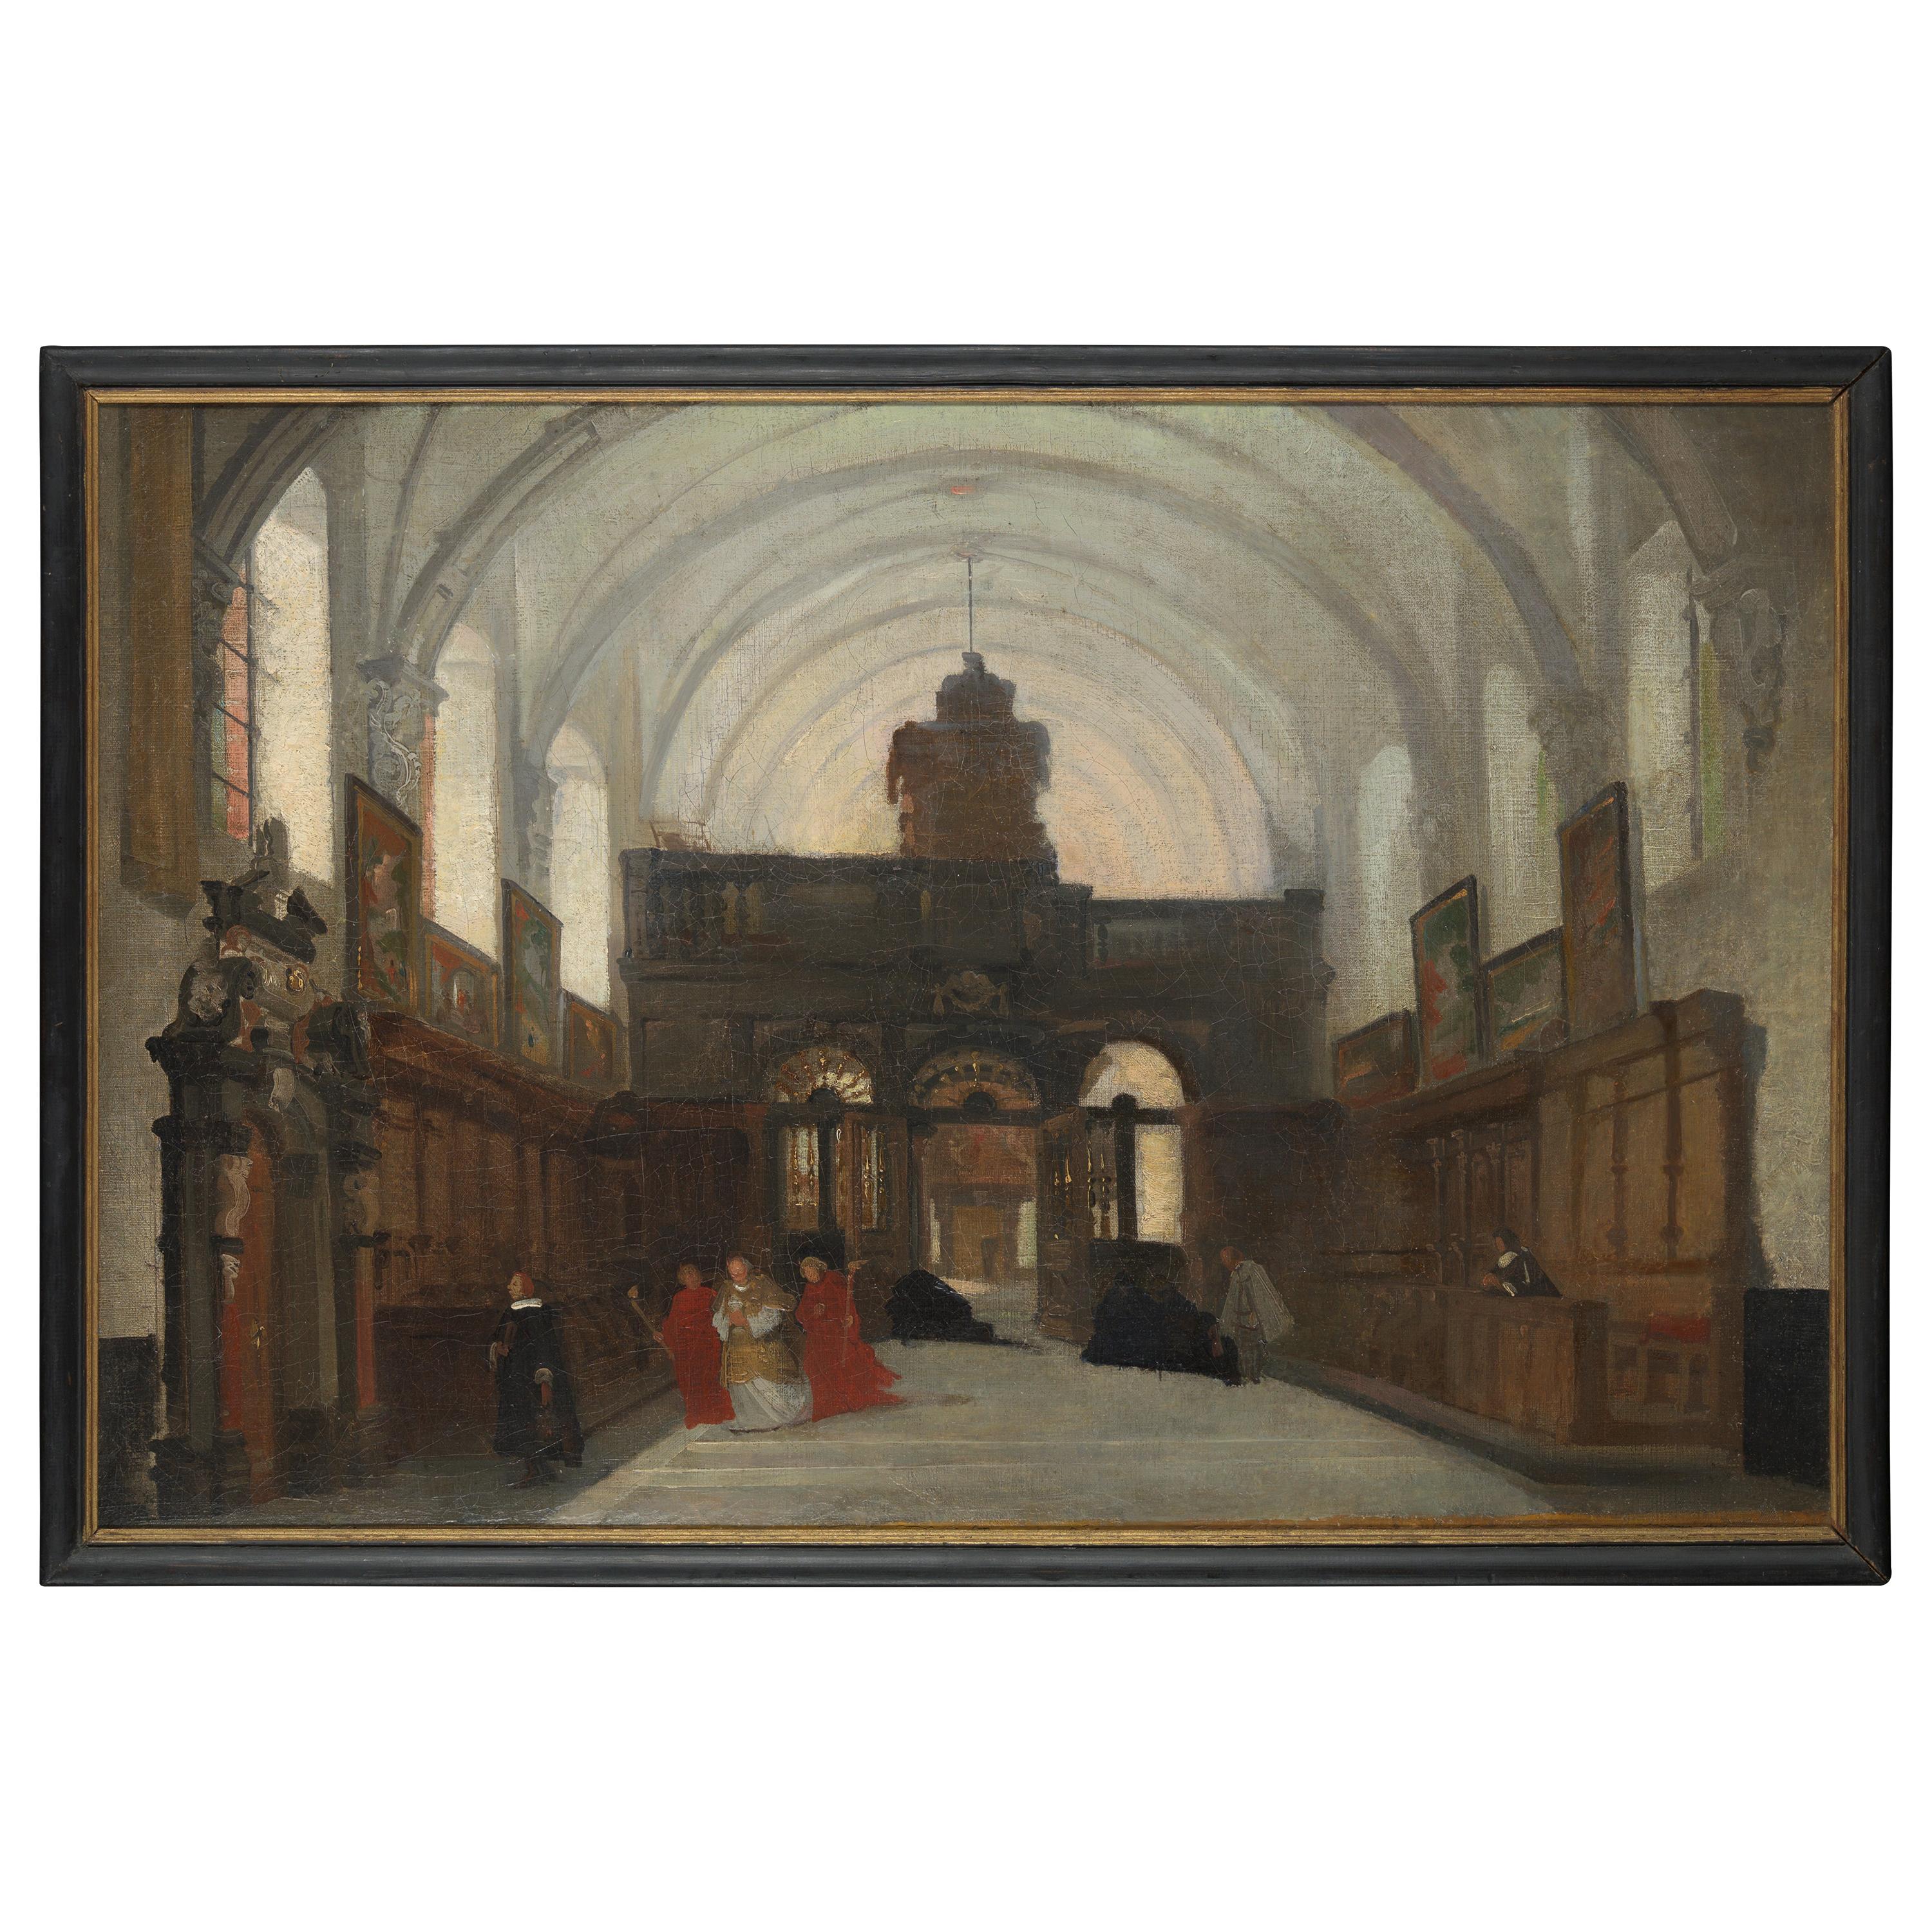 Flemish Shool, Interior of an Old Church Parrish, Oil on Canvas Framed